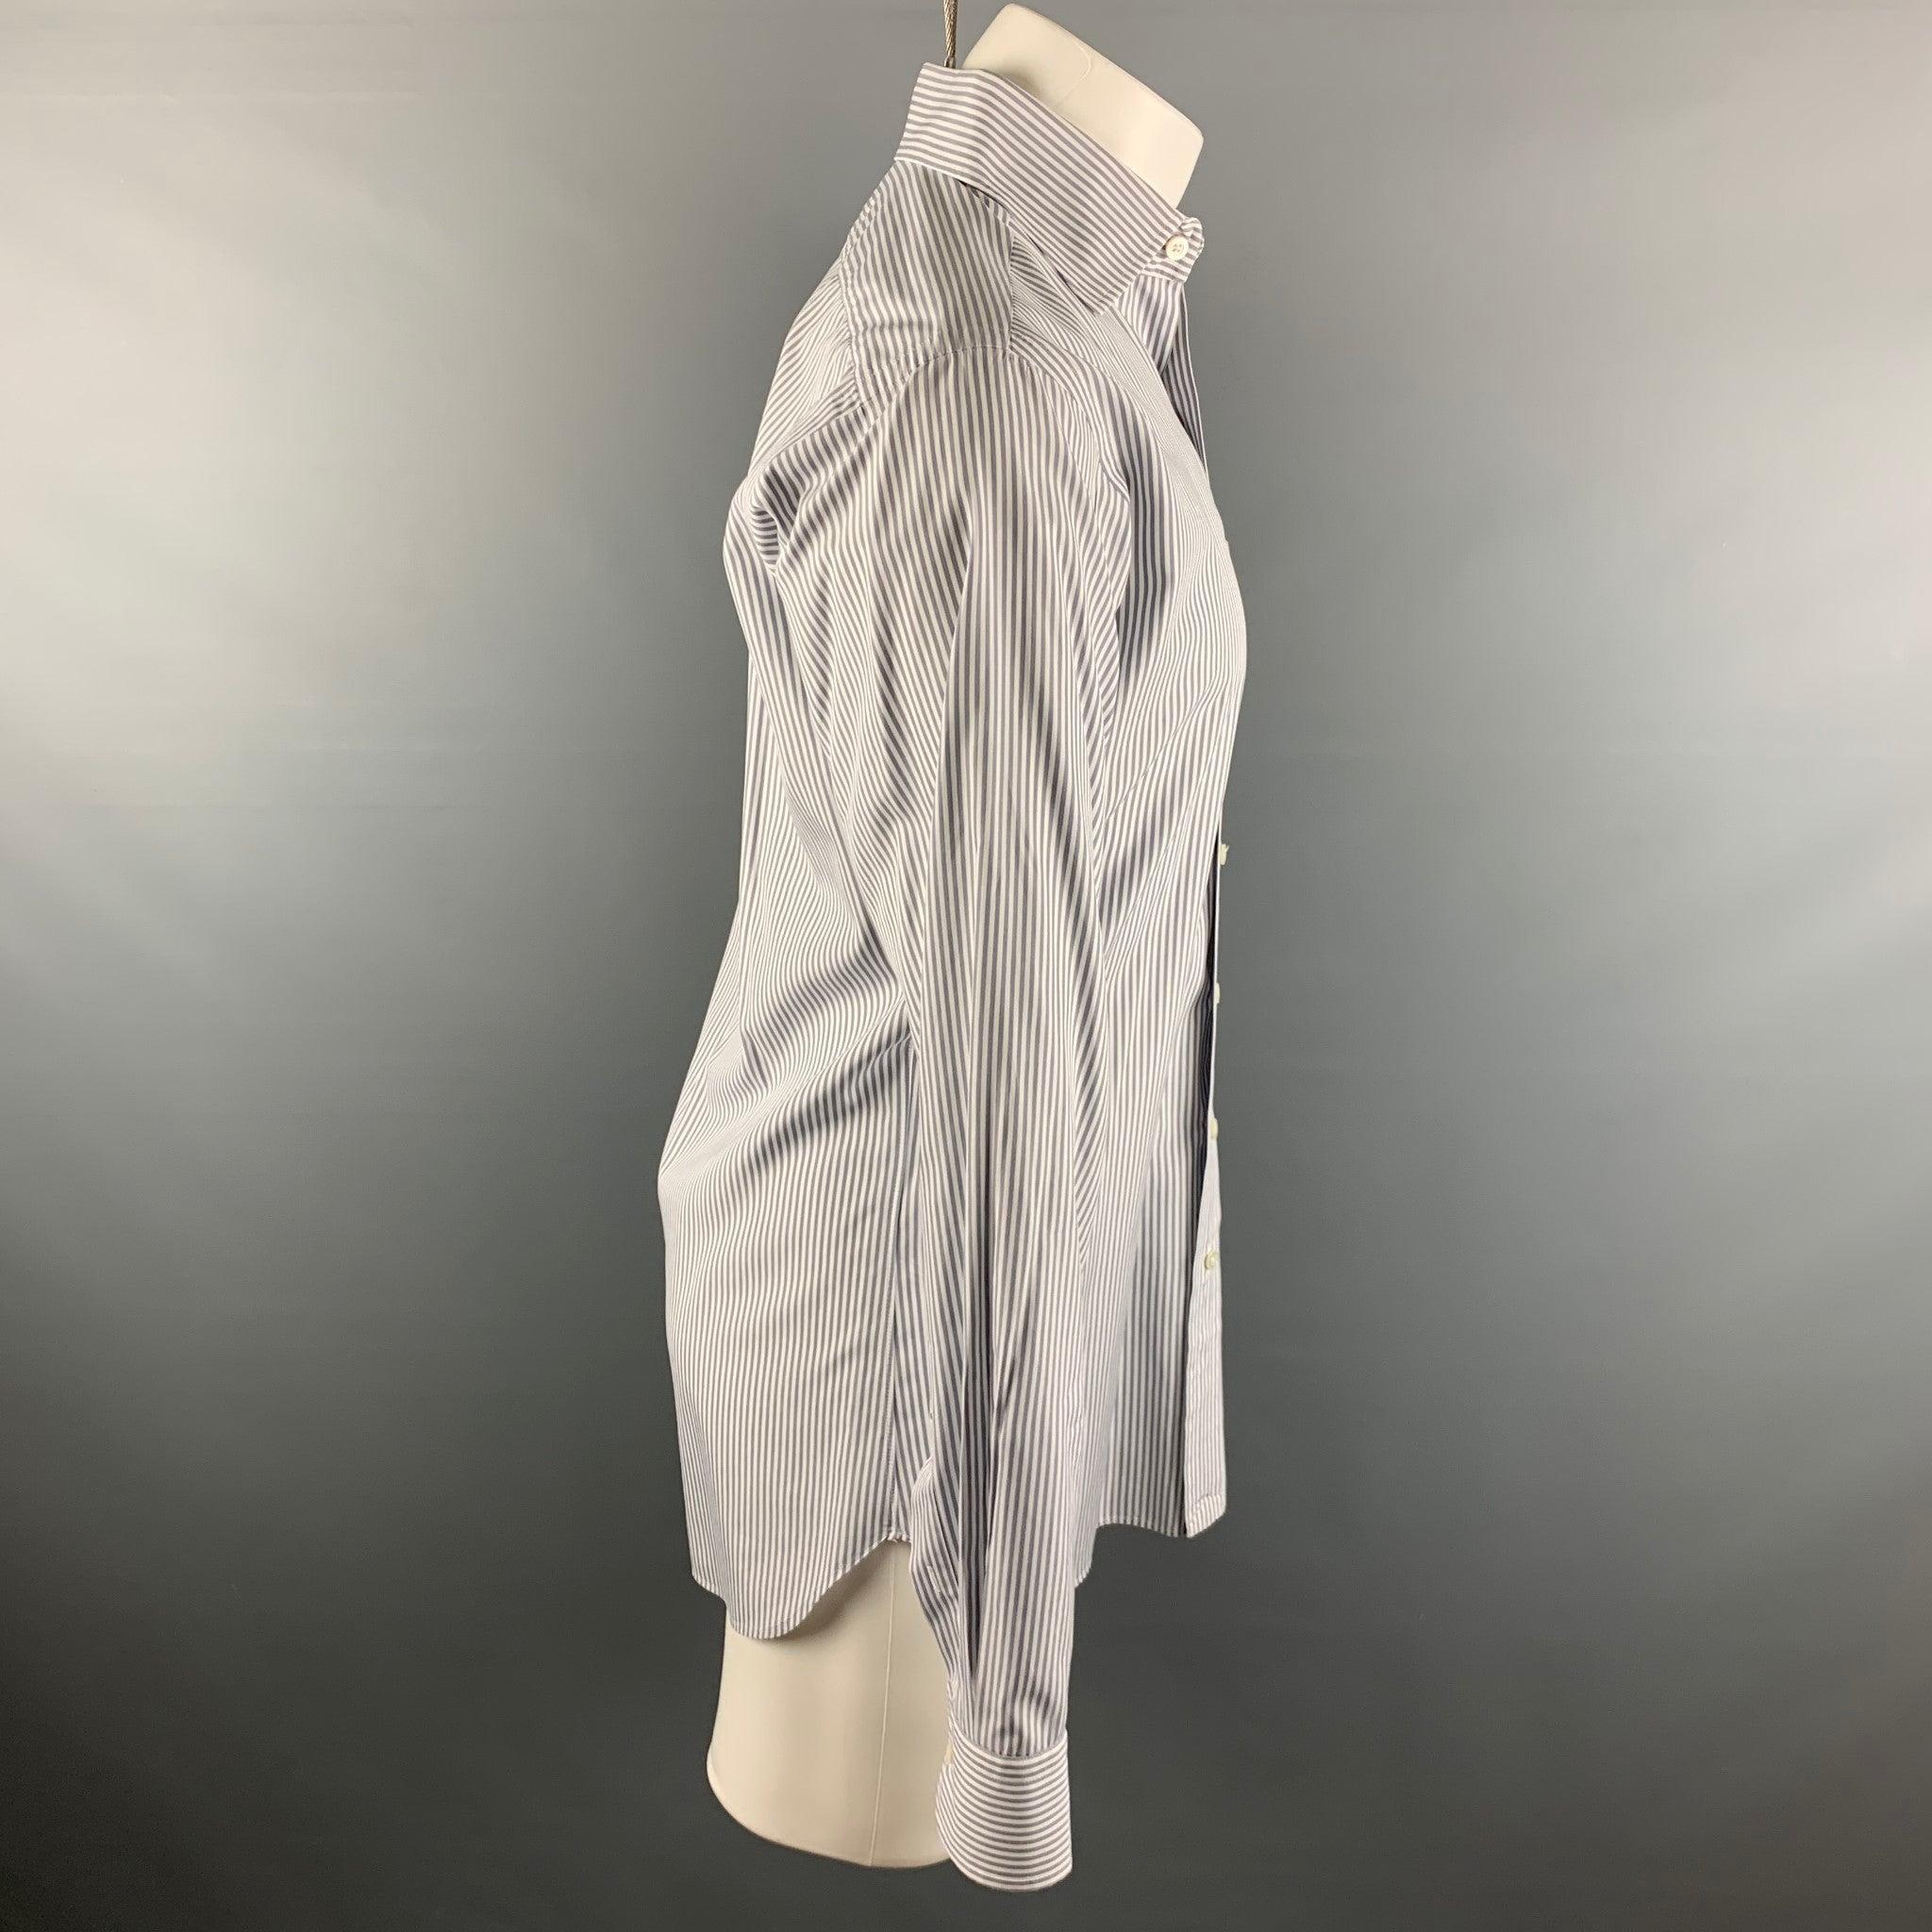 HAMILTON long sleeve button down shirt comes in white cotton, featuring grey stripes, and a button closure.
Very Good Pre-Owned Condition. 

Marked:   M 

Measurements: 
 
Shoulder: 18 inches Chest: 42 inches Sleeve: 27 inches Length: 33 inches 